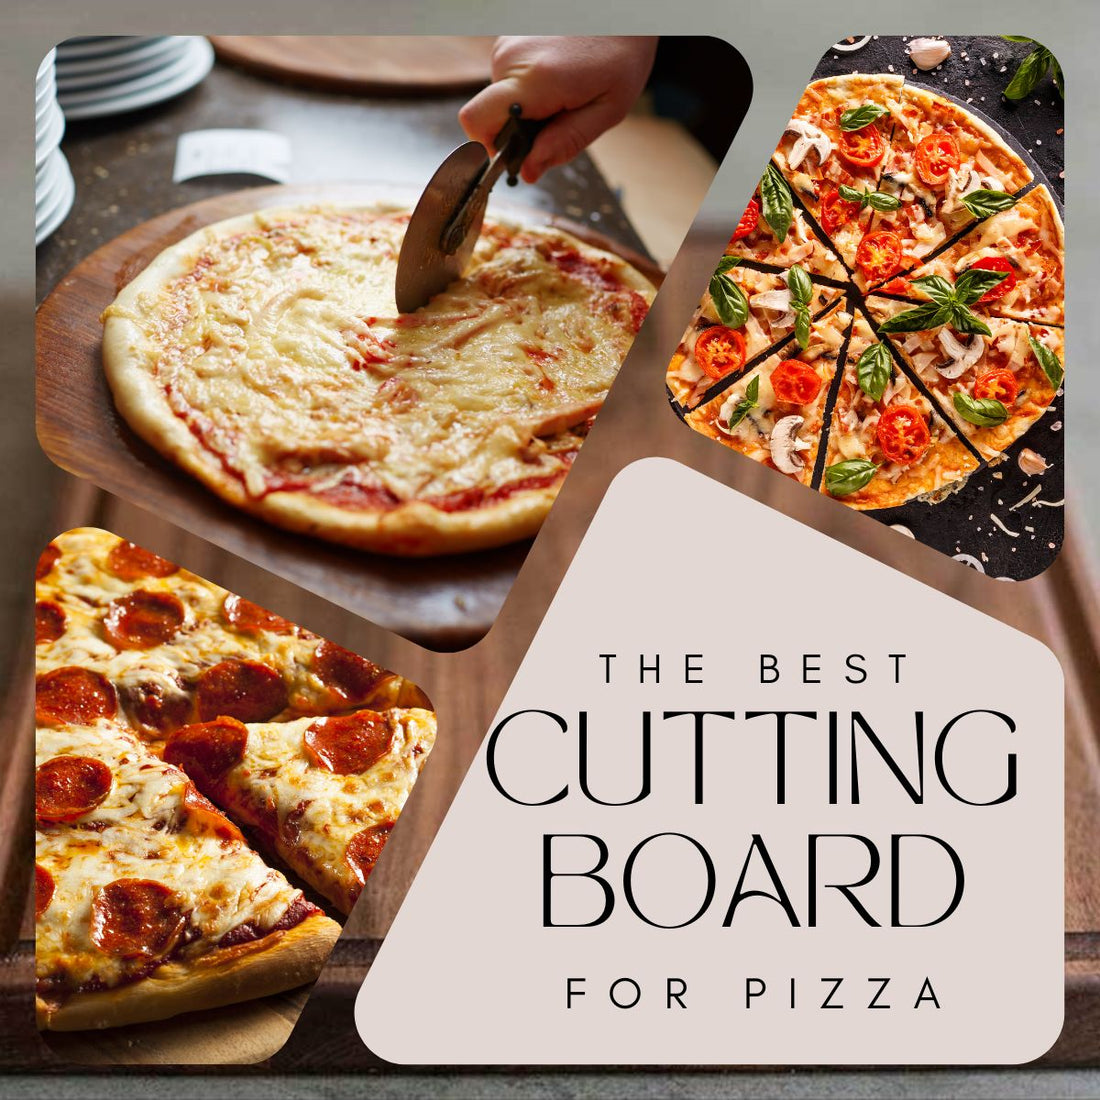 graphic design collage of pizzas on cutting boards to show the best cutting board for pizza